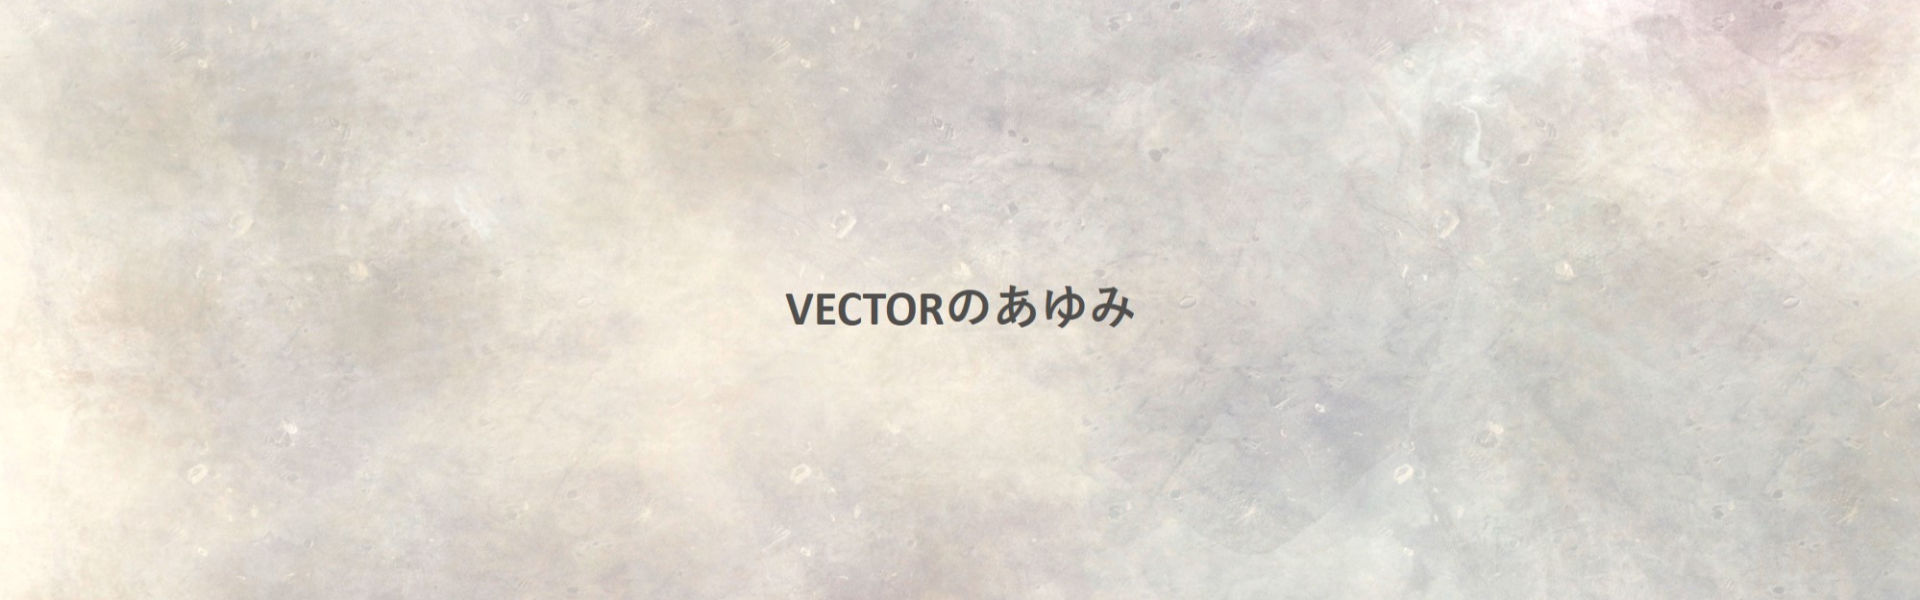 History of VECTOR